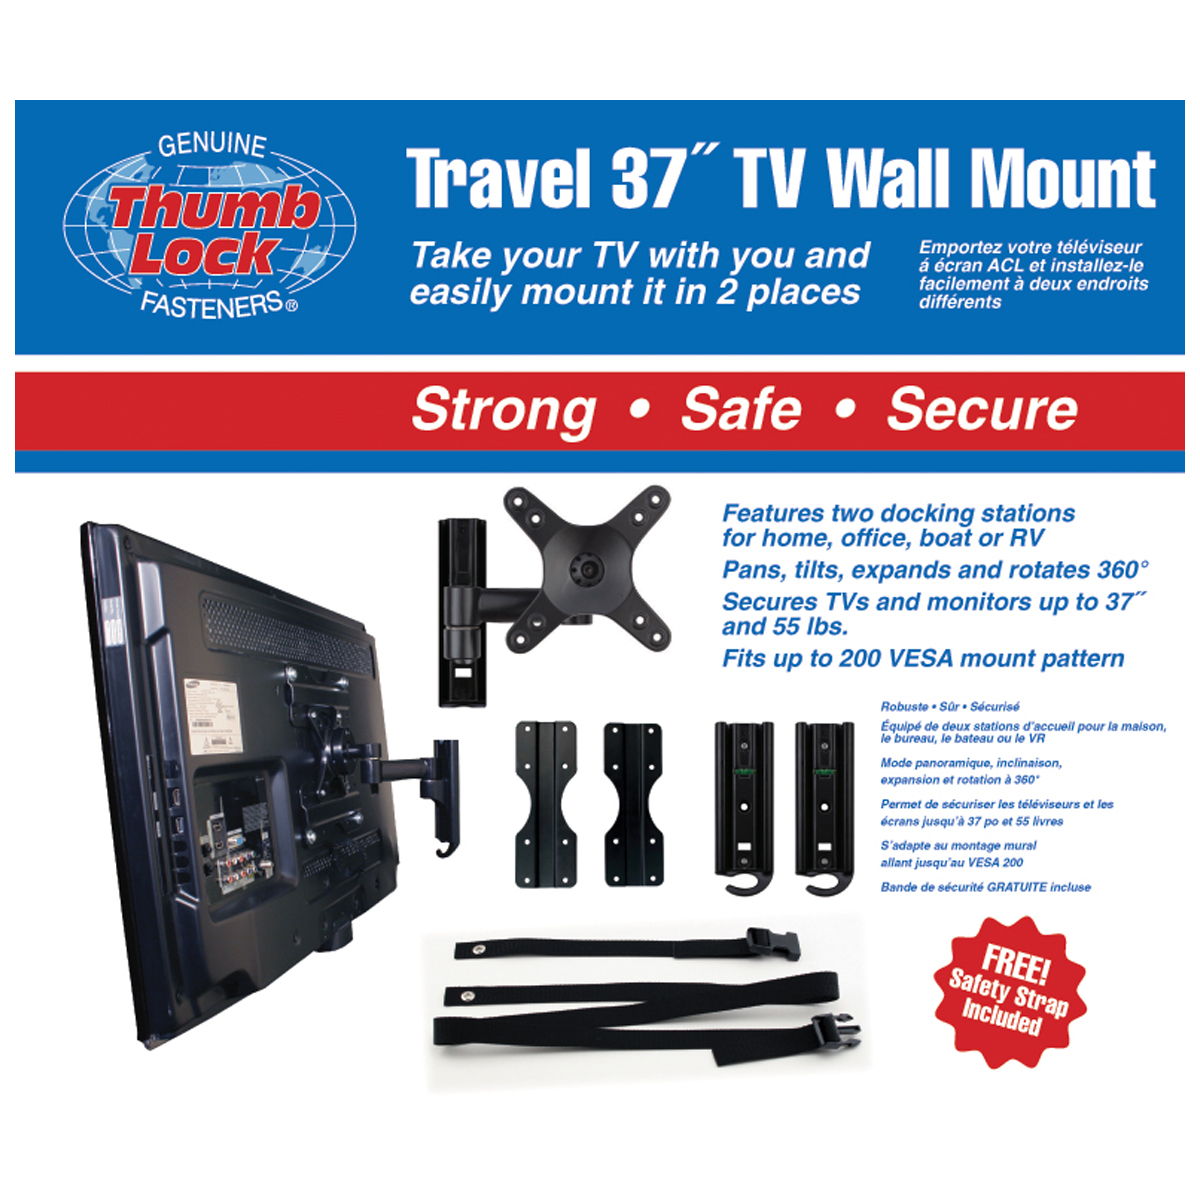 Travel TV Mount up to 37" & 55lbs